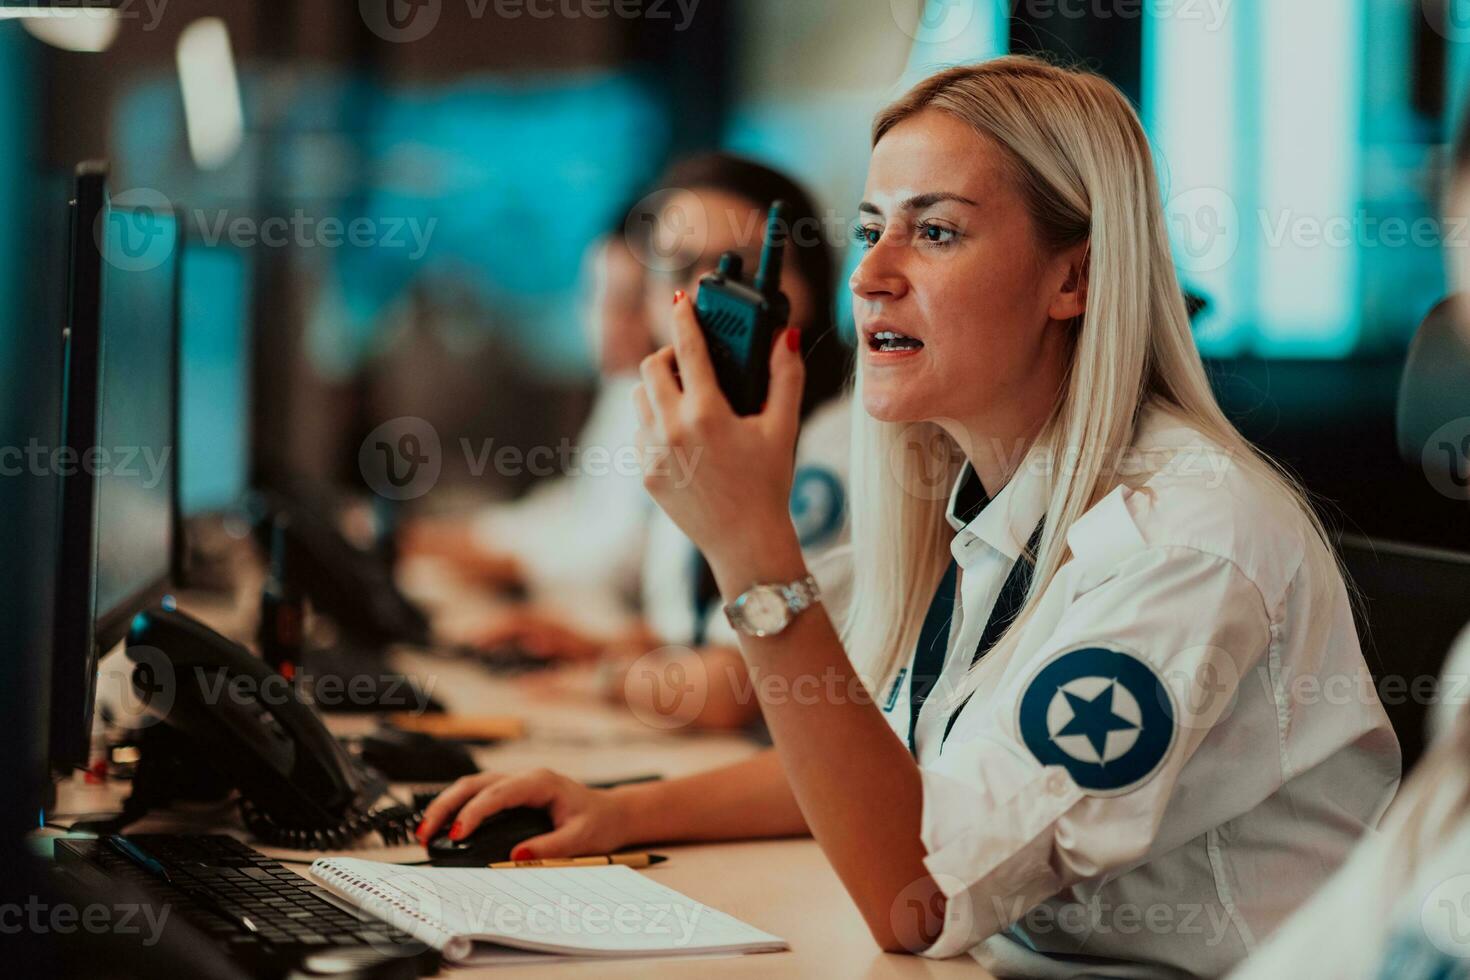 Female security operator holding portable radio in hand while working in a data system control room offices Technical Operator Working at workstation with multiple displays, security guard working on photo